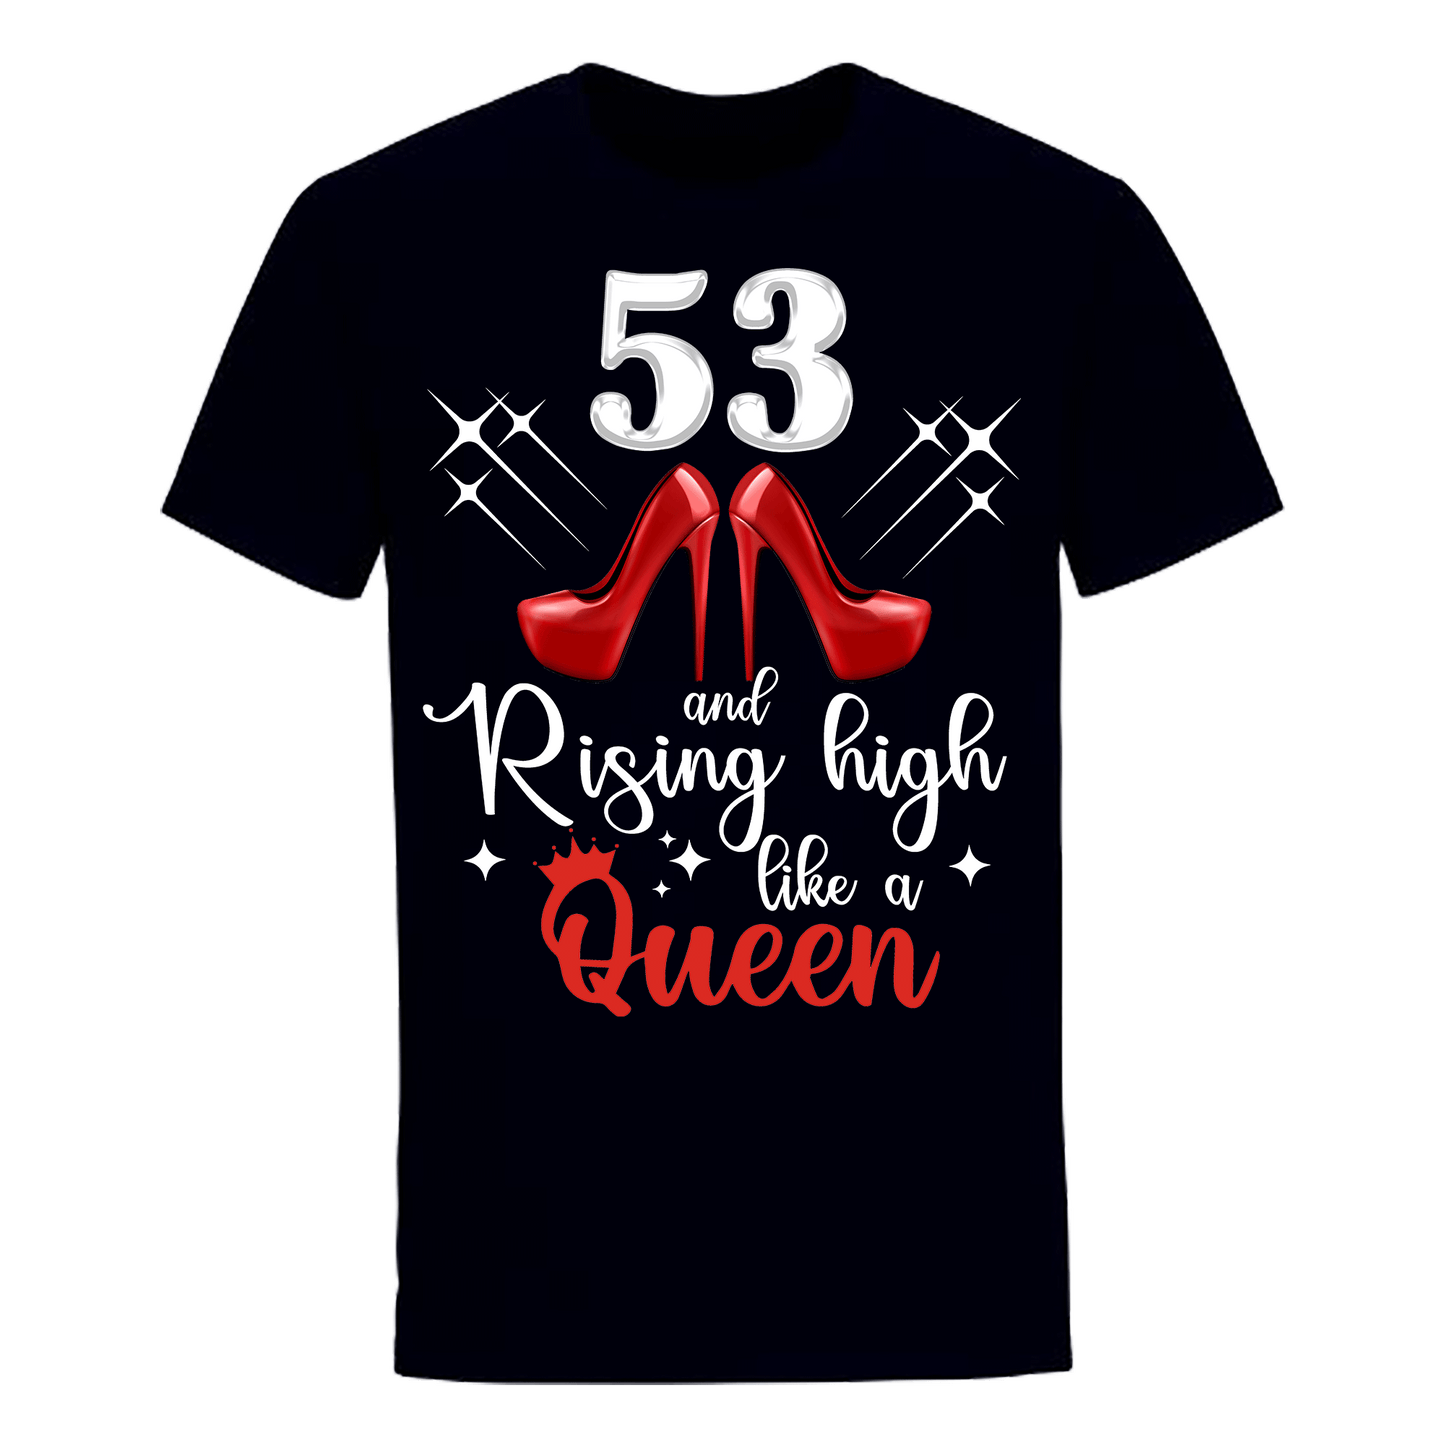 53 and Rising High like a queen unisex shirt.